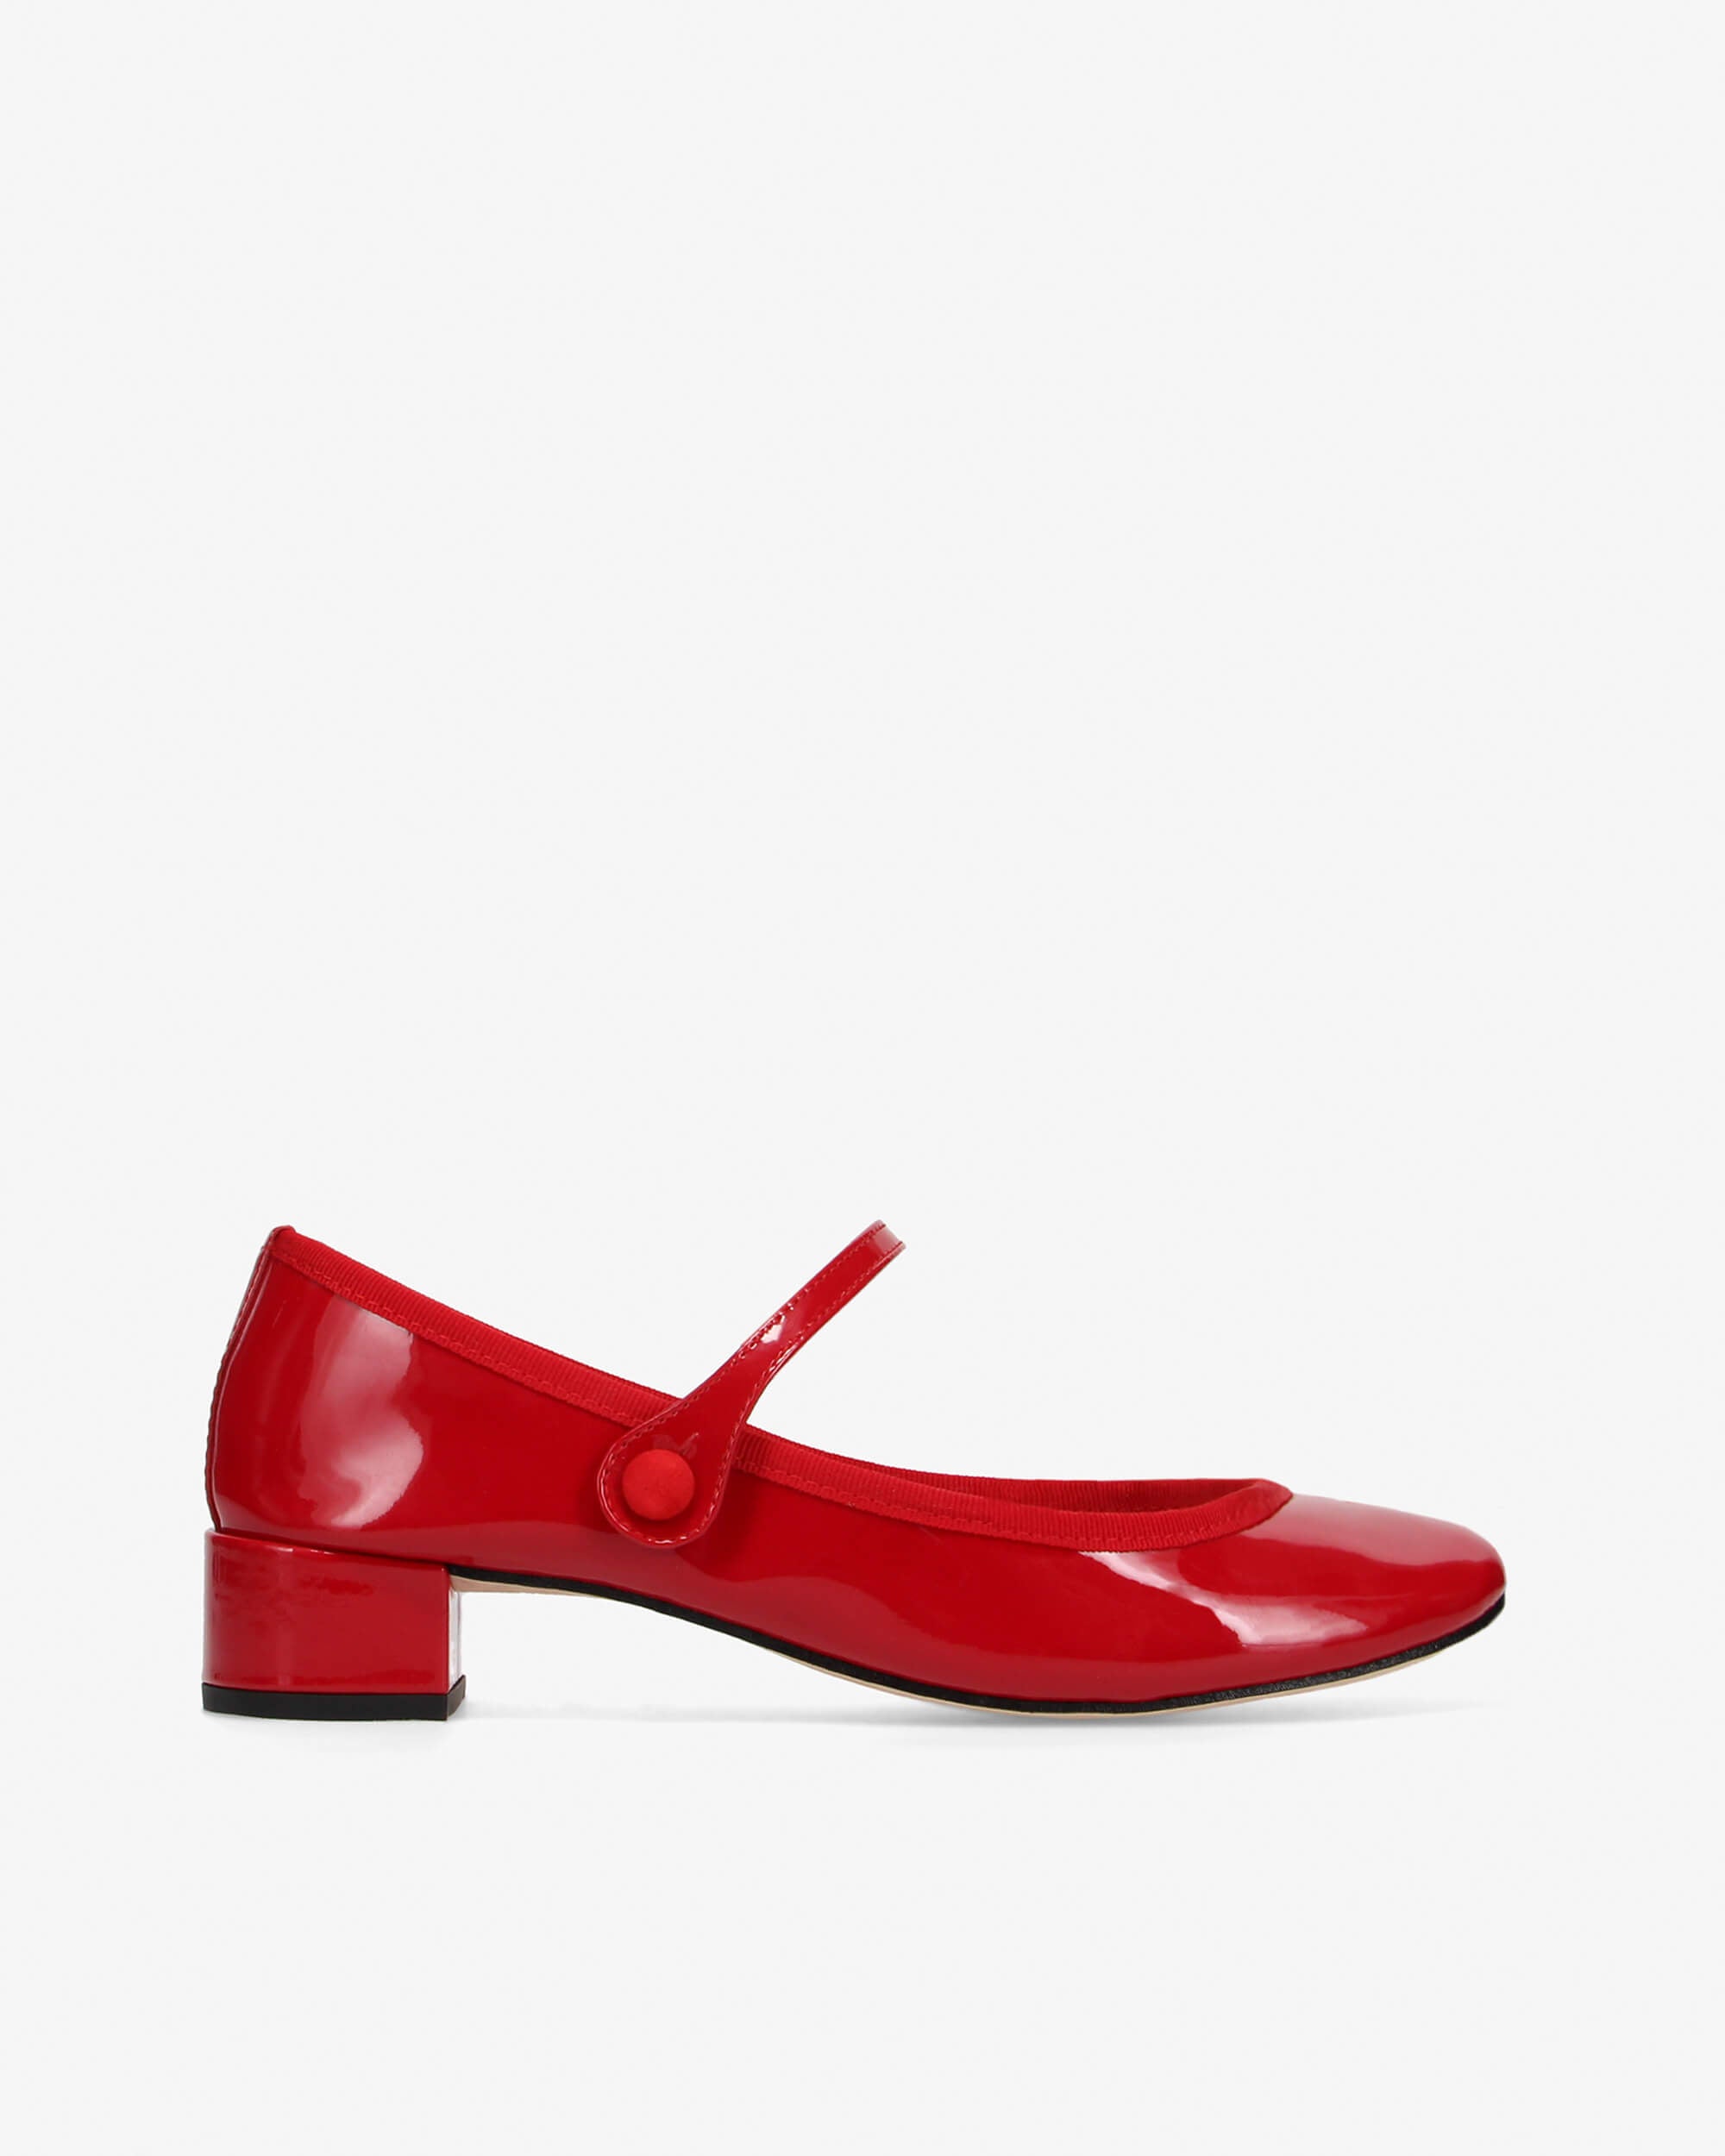 Guillemette Mary Janes – Repetto